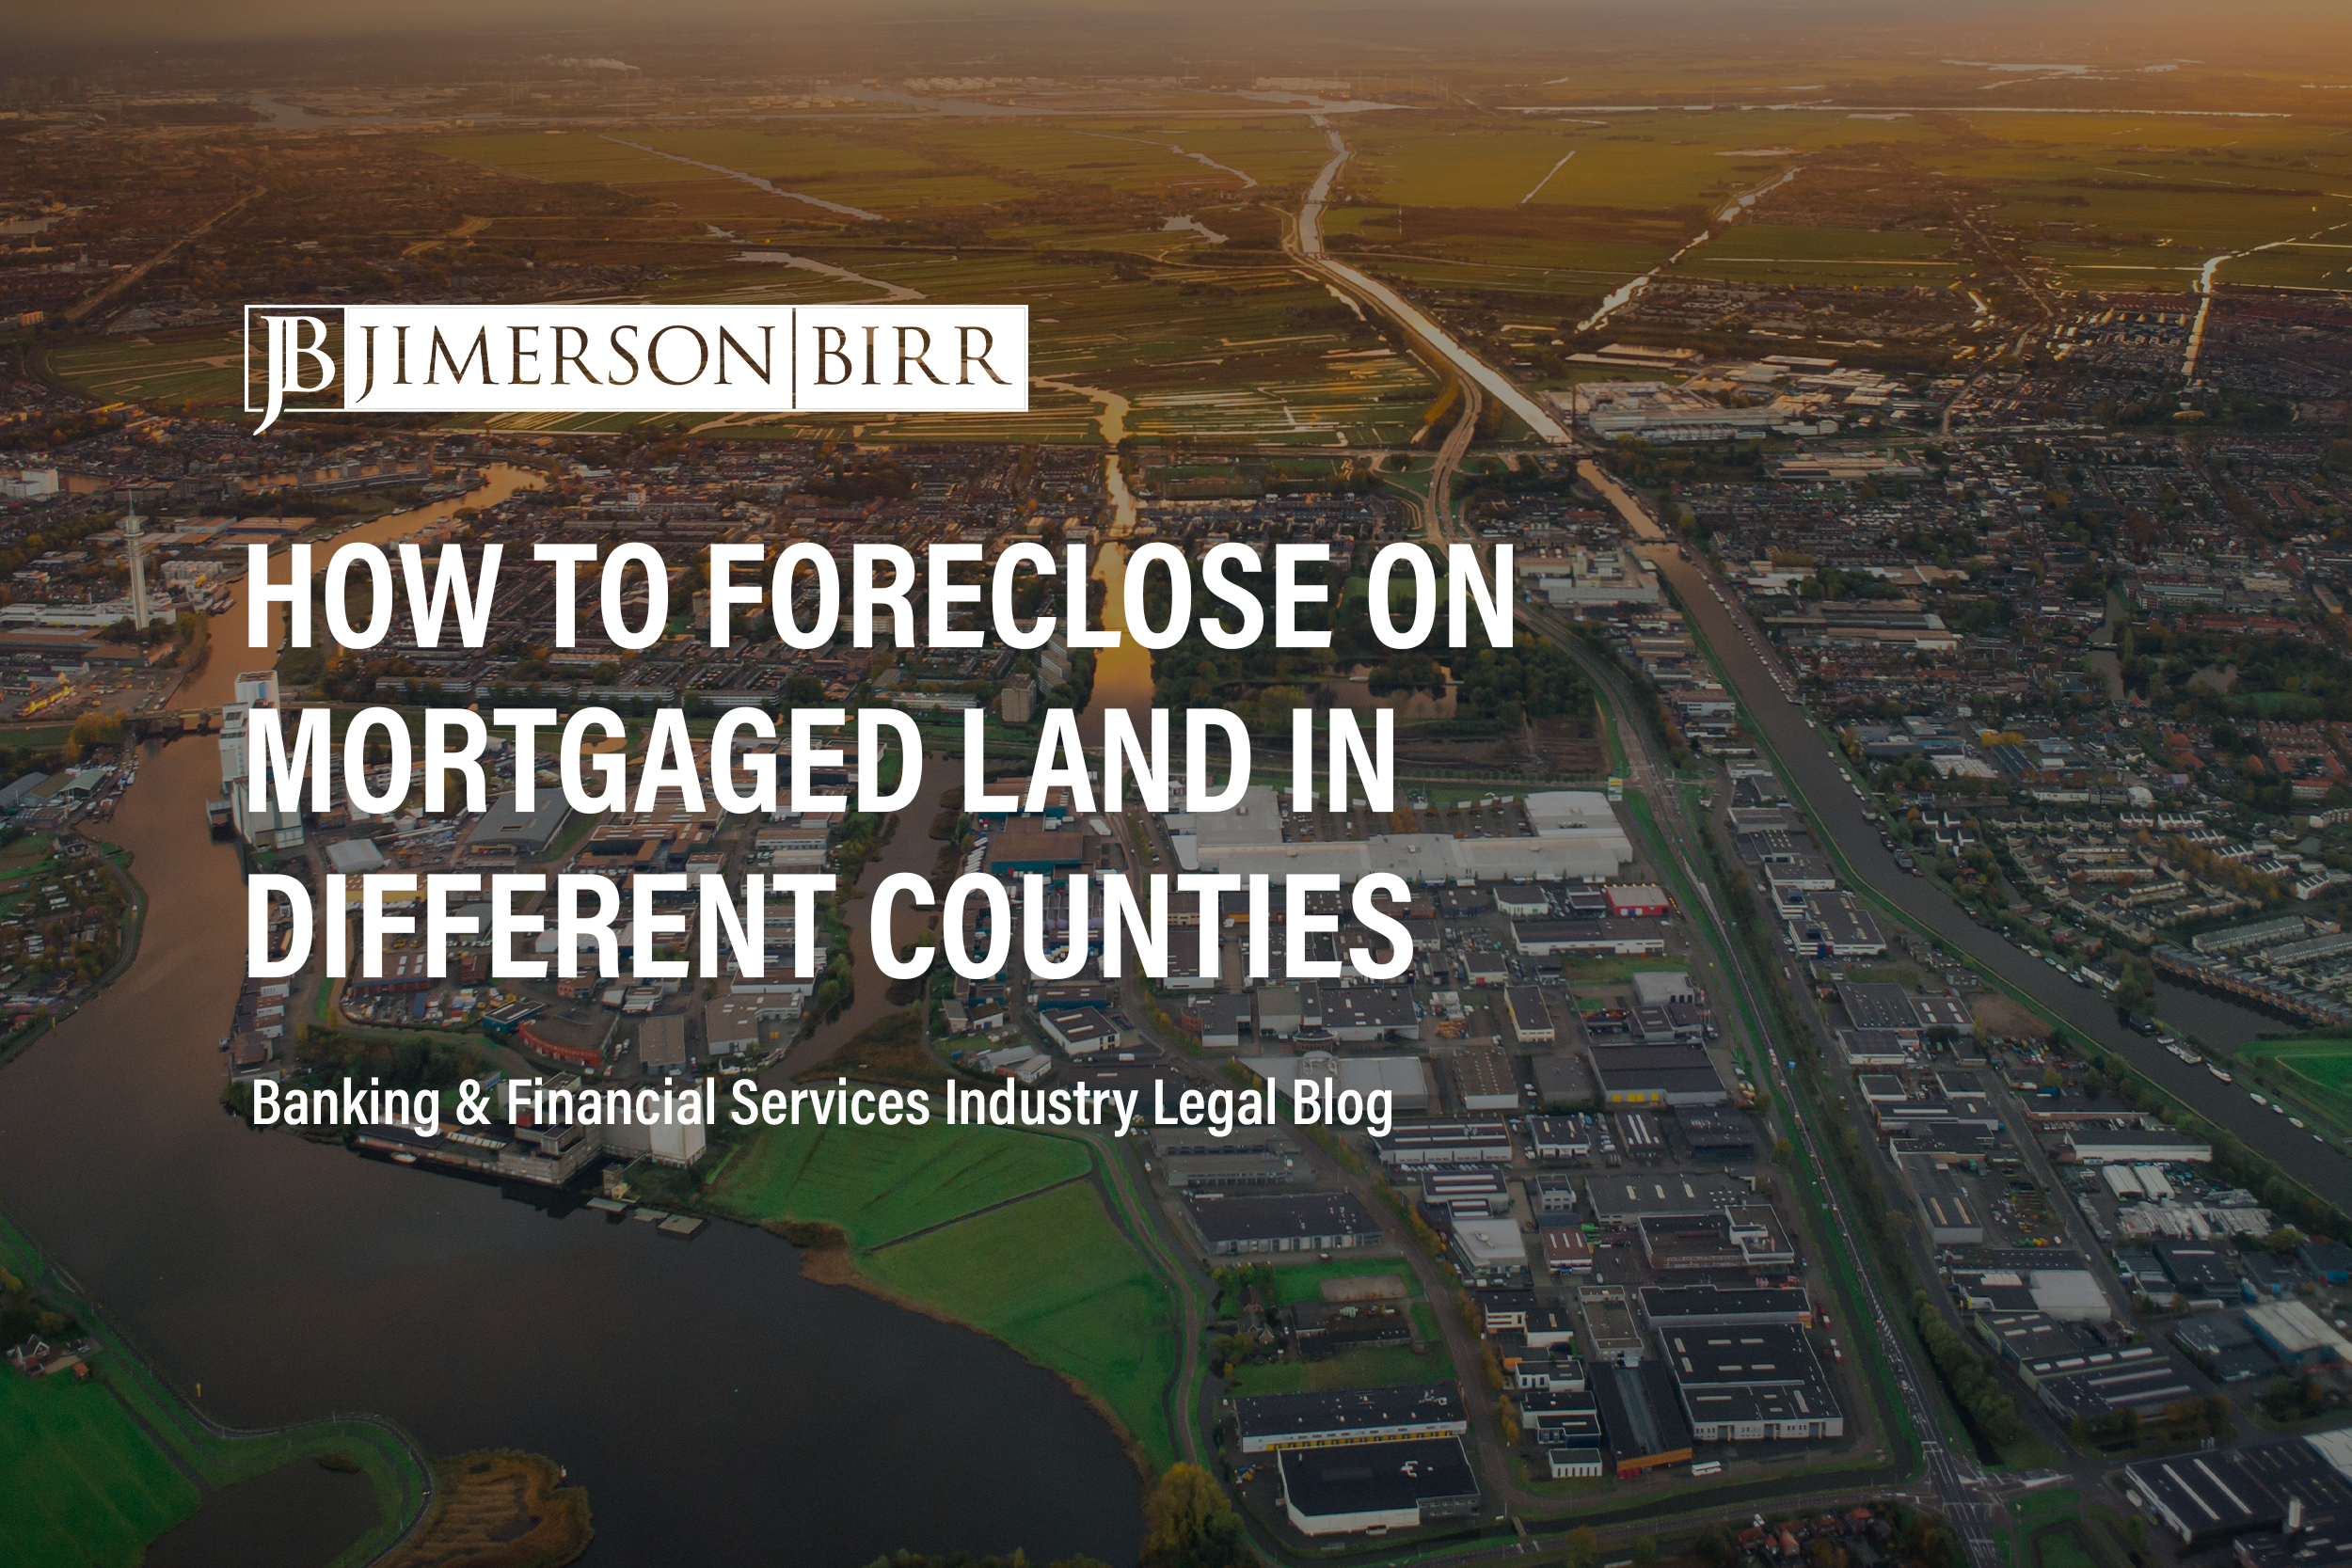 How to Foreclose on Mortgaged Land in Different Counties